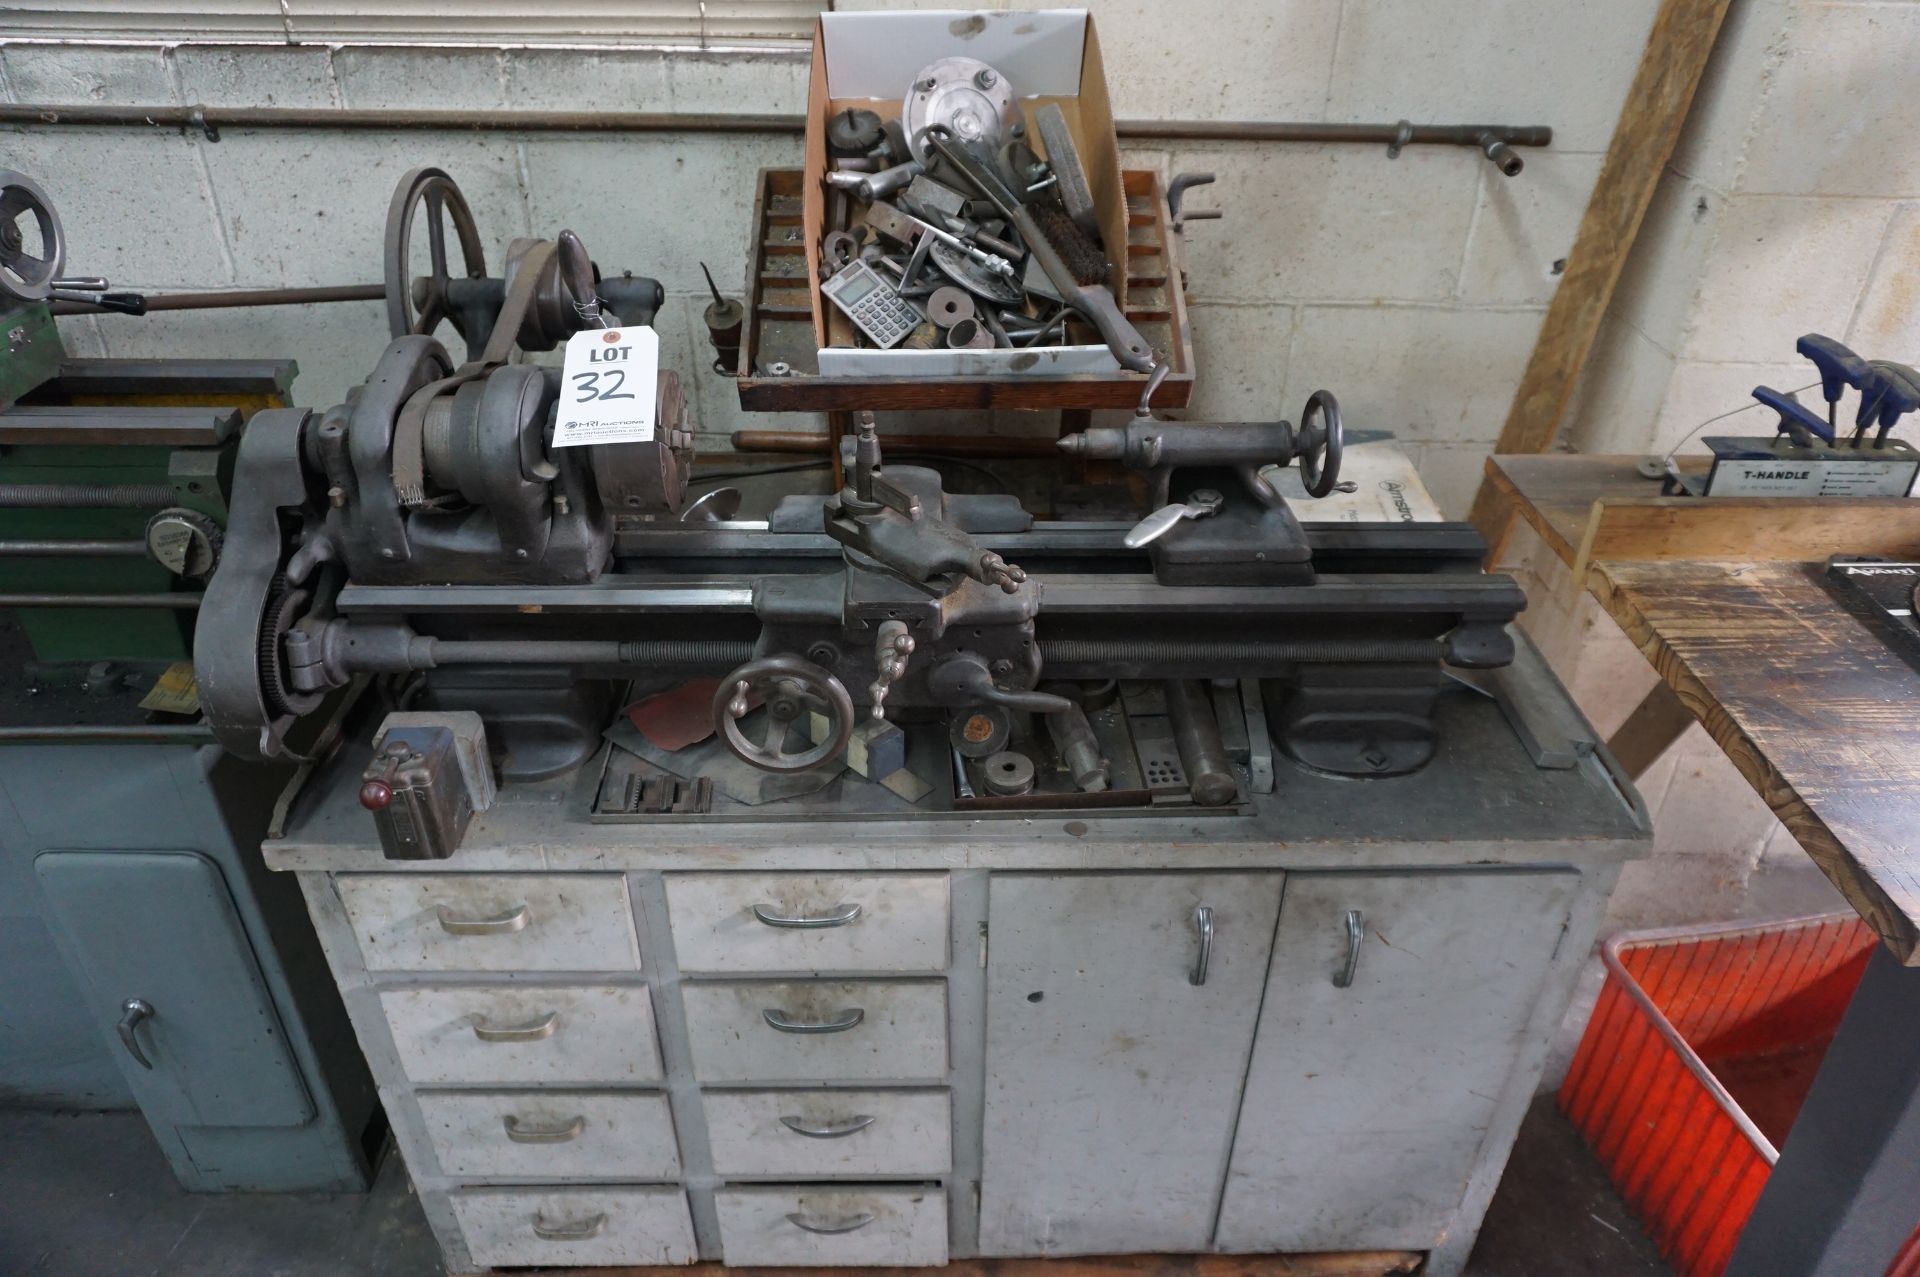 SOUTHBEND MACHINE LATHE MODEL C9-10JR, CATALOG NUMBER 41524 WITH ORGANIZER CABINET